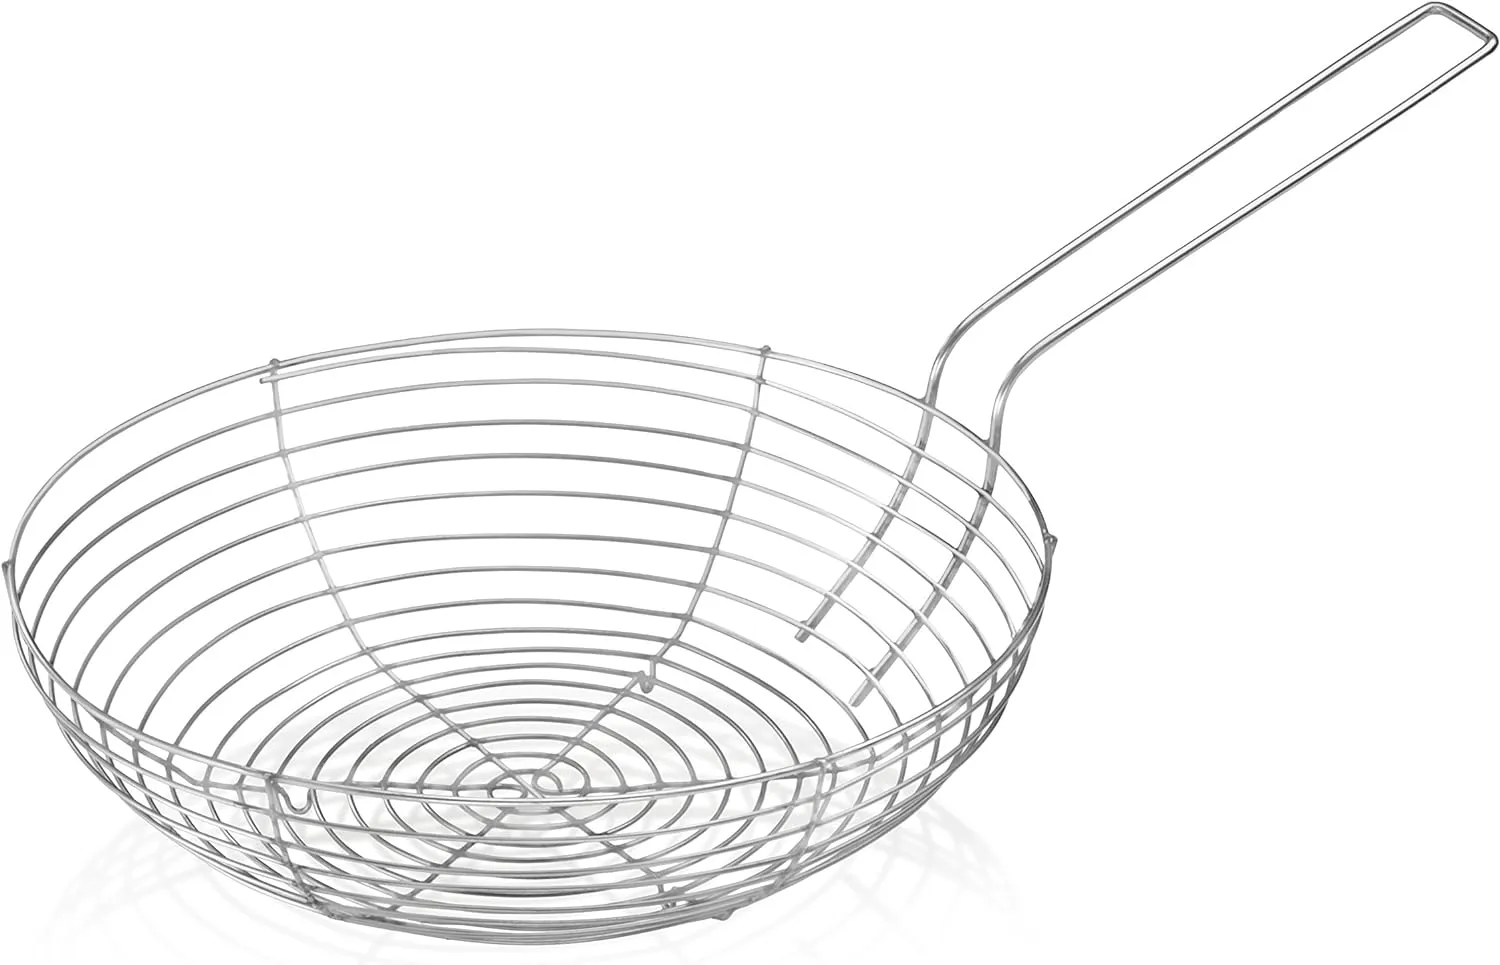 Lagostina Linea Rossa Wok in 18/10 Stainless Steel with Frying and Steaming Basket 28 cm